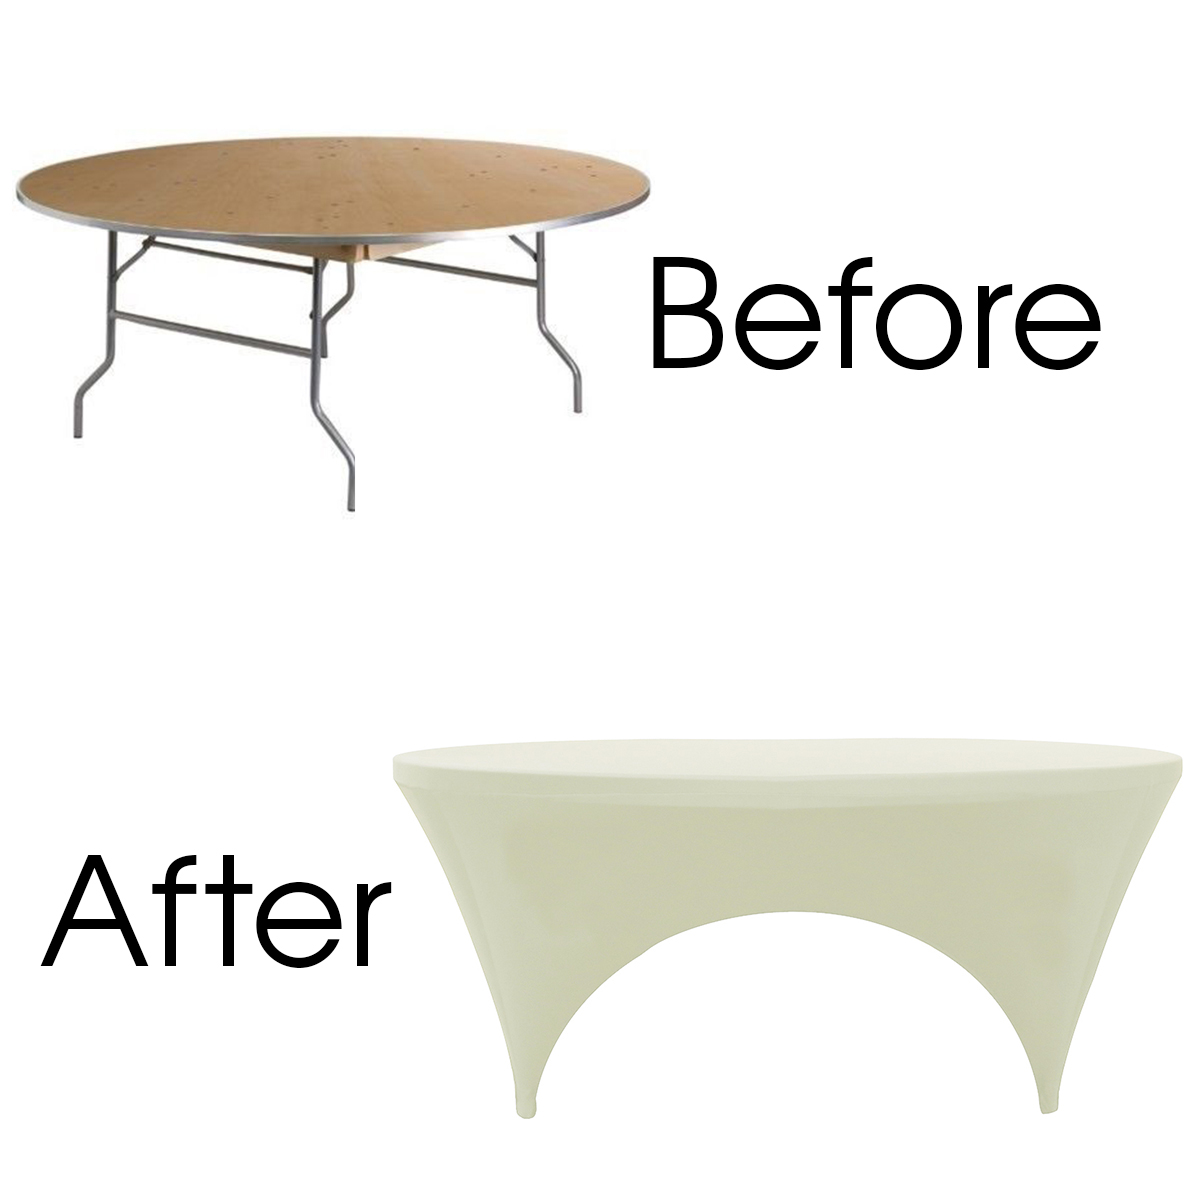 stretch-spandex-6ft-round-table-covers-ivory-sides-open-before-after.jpg